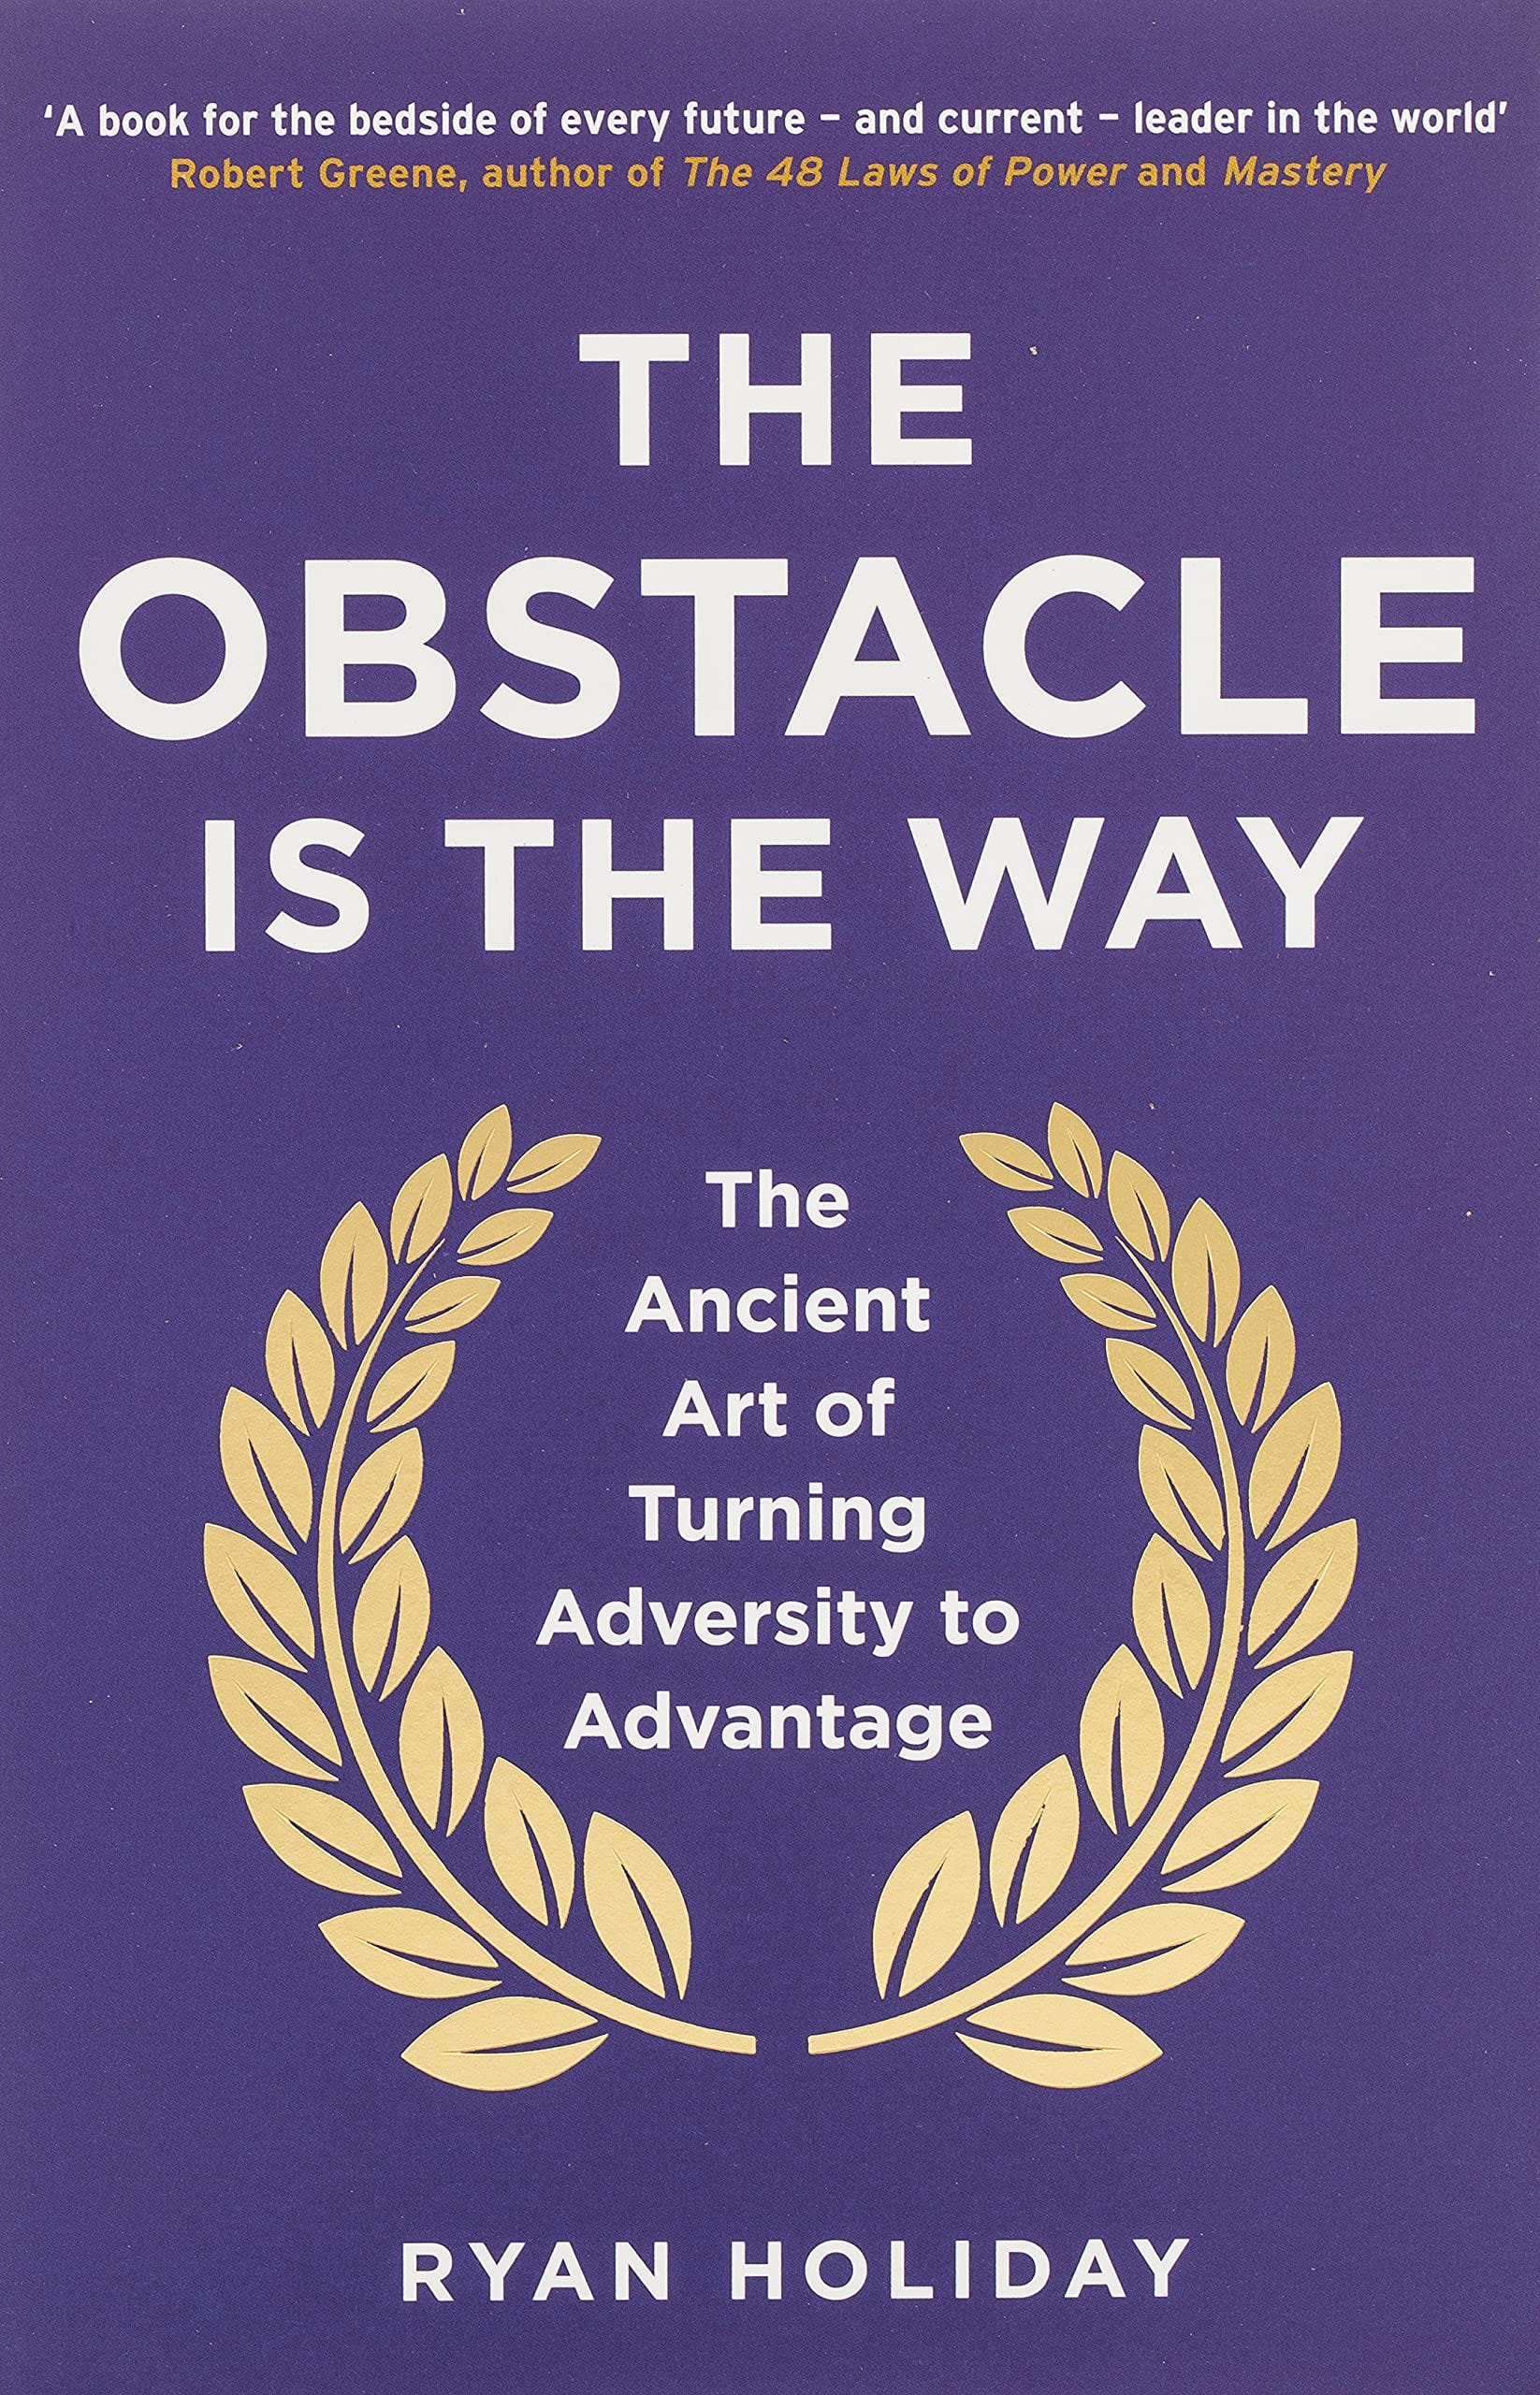 Livre #3 : The obstacle is the way - by Nicolas Galita